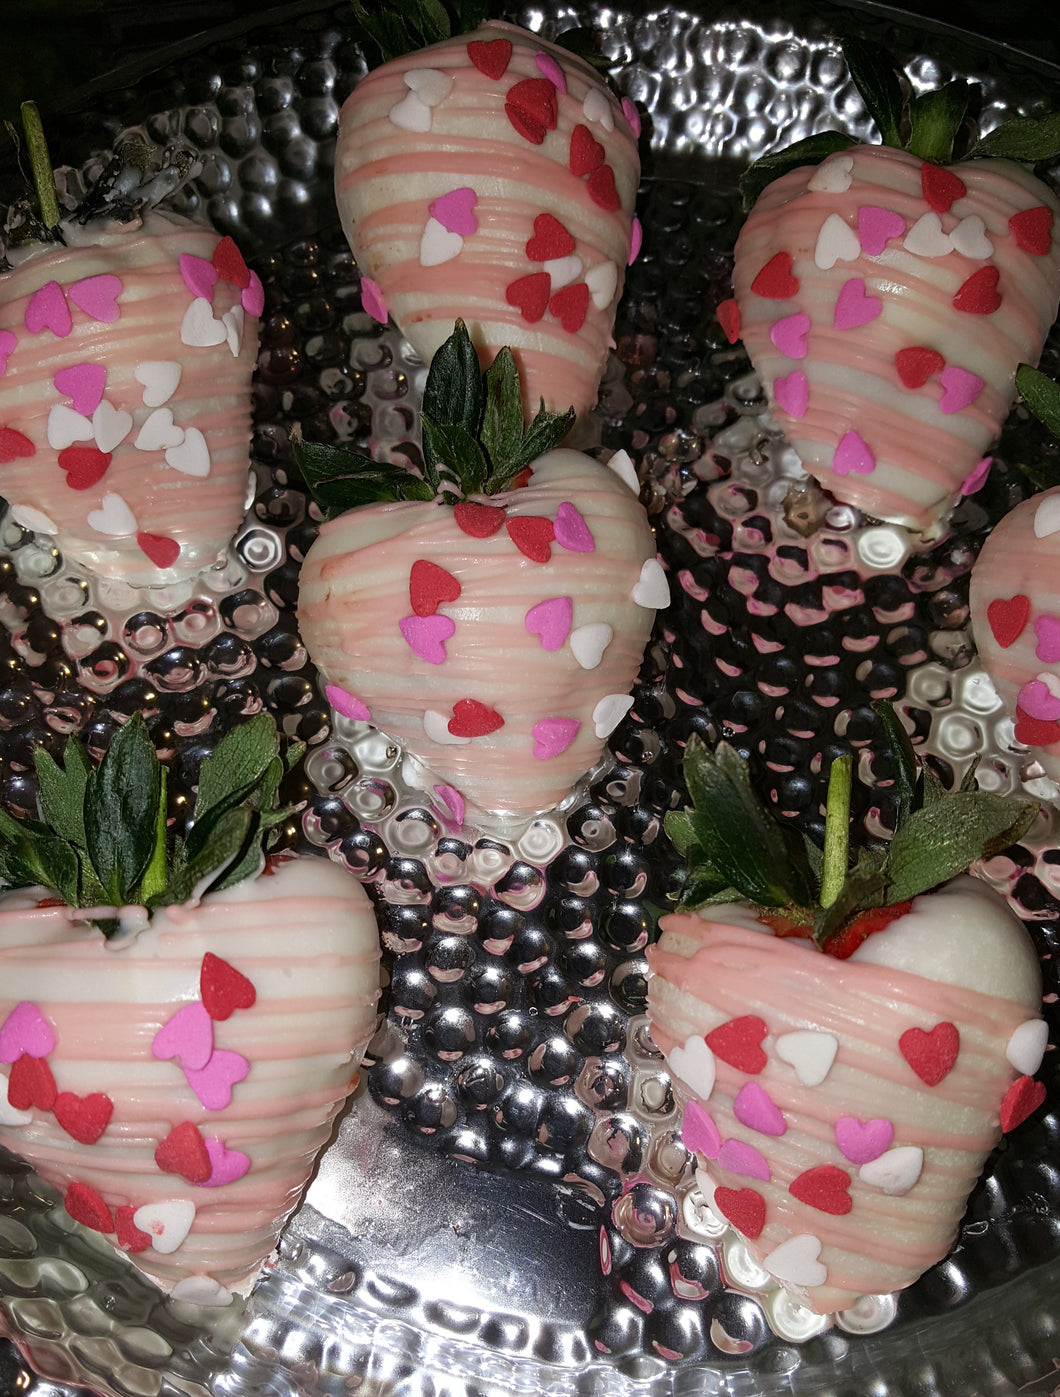 Strawberries - Chocolate Covered/Dipped (Pink w/ Heart Sprinkles)